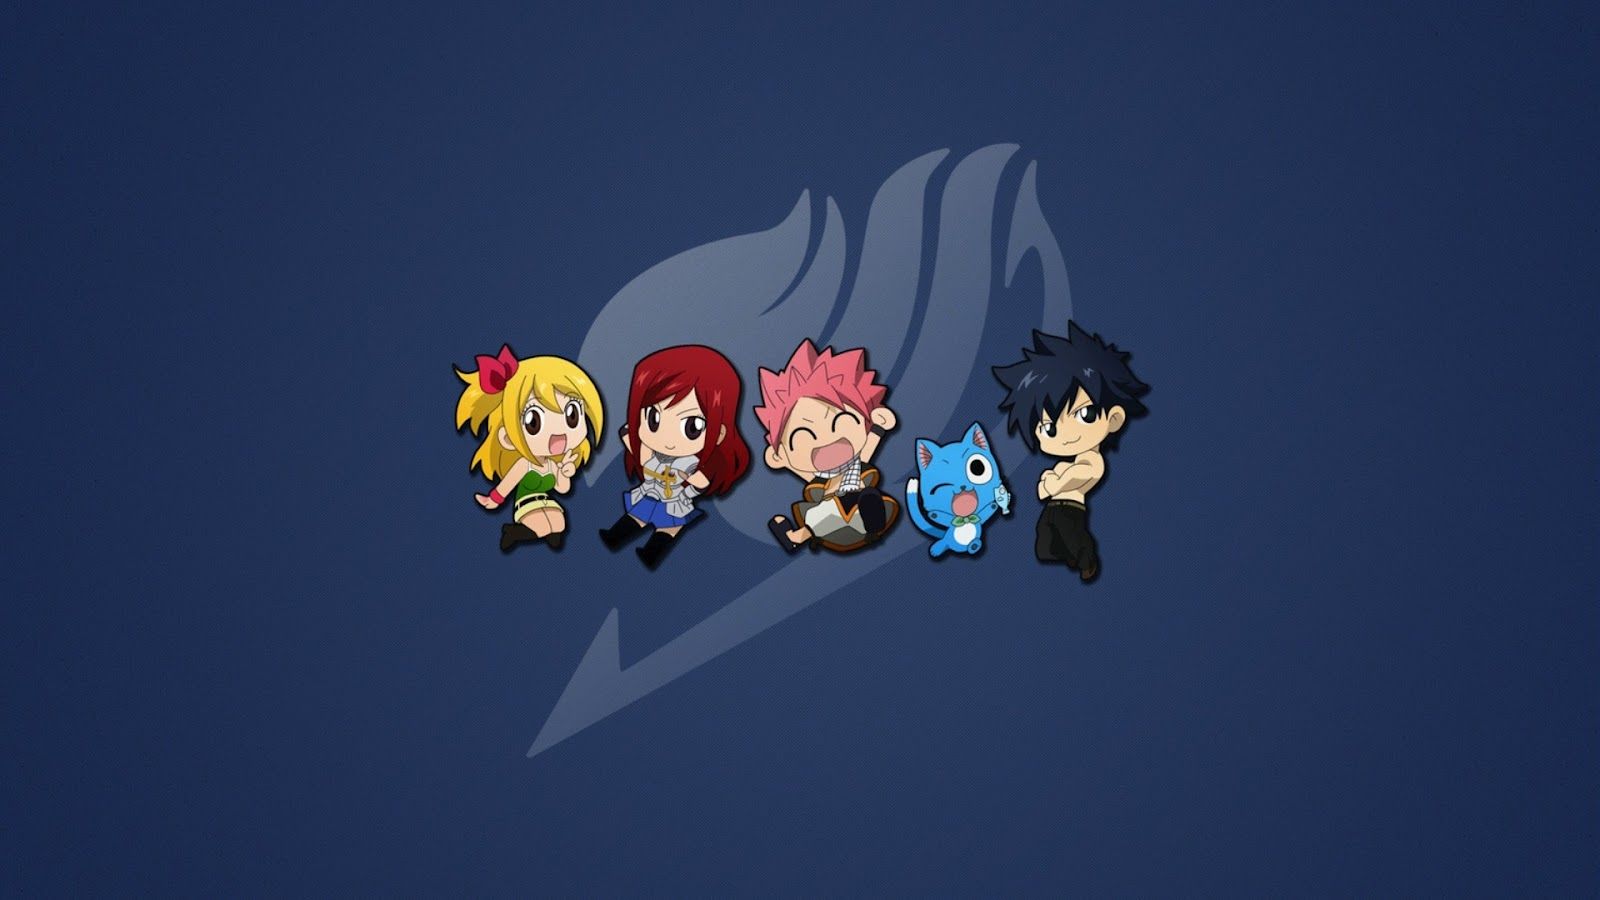 Fairy Tail Wallpaper HD 2016 Wallpapers, Backgrounds, Images